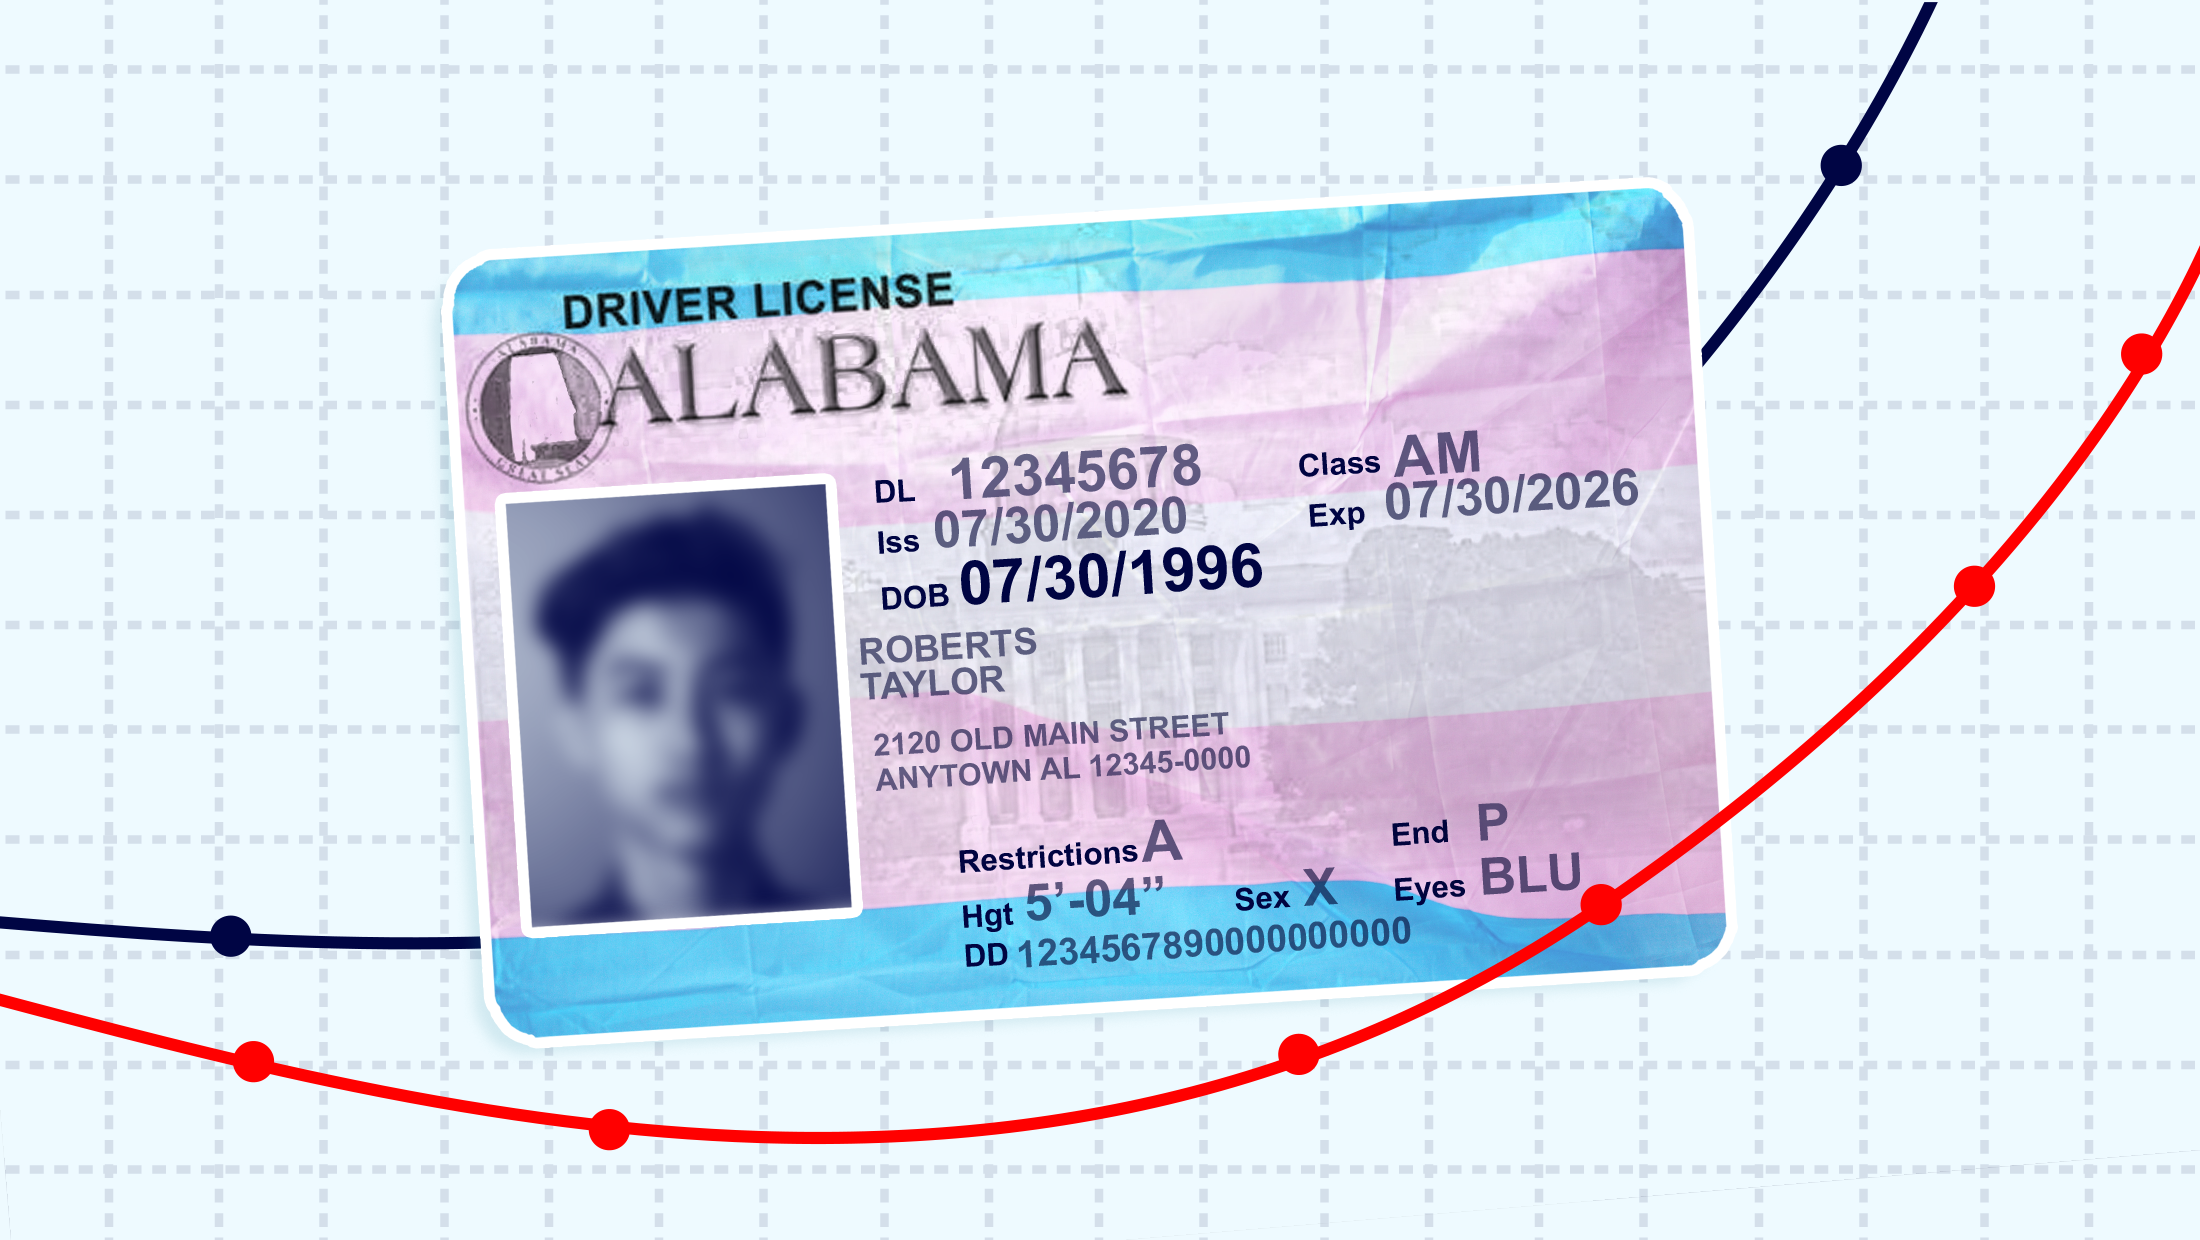 An Alabama driver's license tinted in the transgender flag colors, mounted on a piece of graph paper with various data points